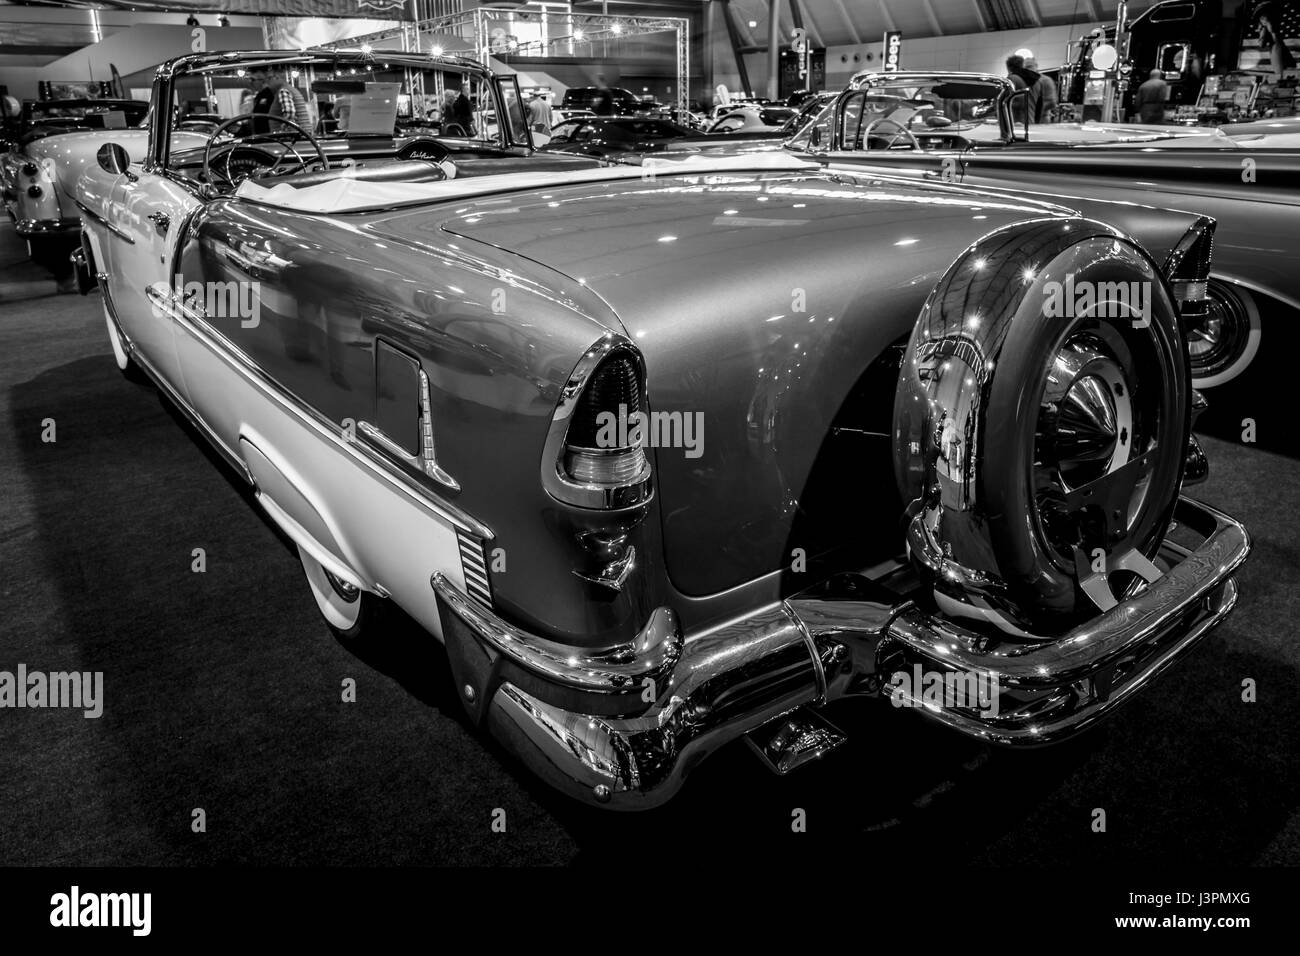 STUTTGART, GERMANY - MARCH 03, 2017: Full-size car Chevrolet Bel Air Convertible, 1955. Rear view. Black and white. Europe's greatest classic car exhibition 'RETRO CLASSICS' Stock Photo